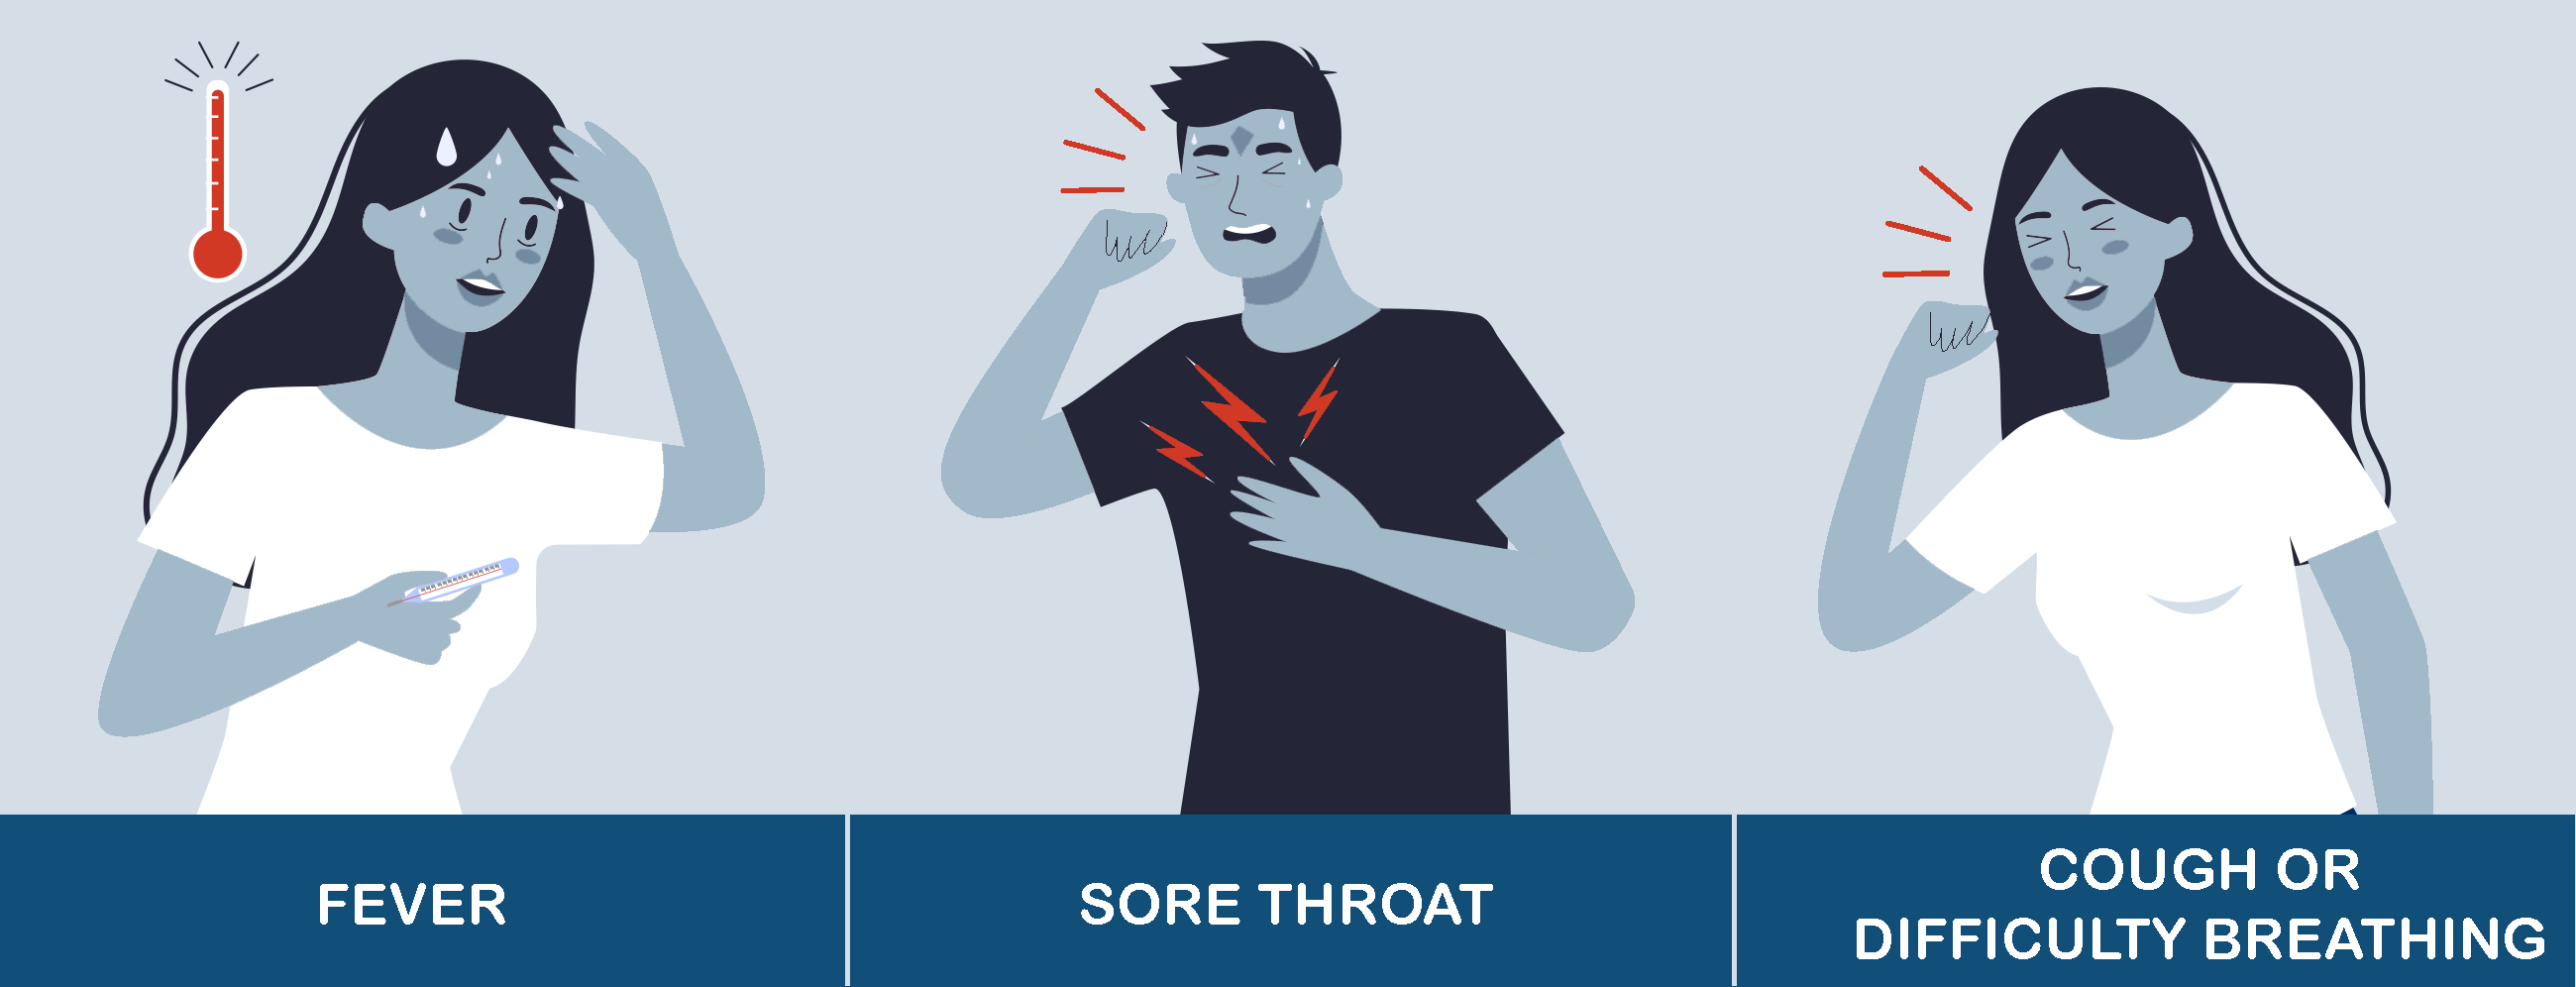 fever; sore throat; cough or difficulty breathing